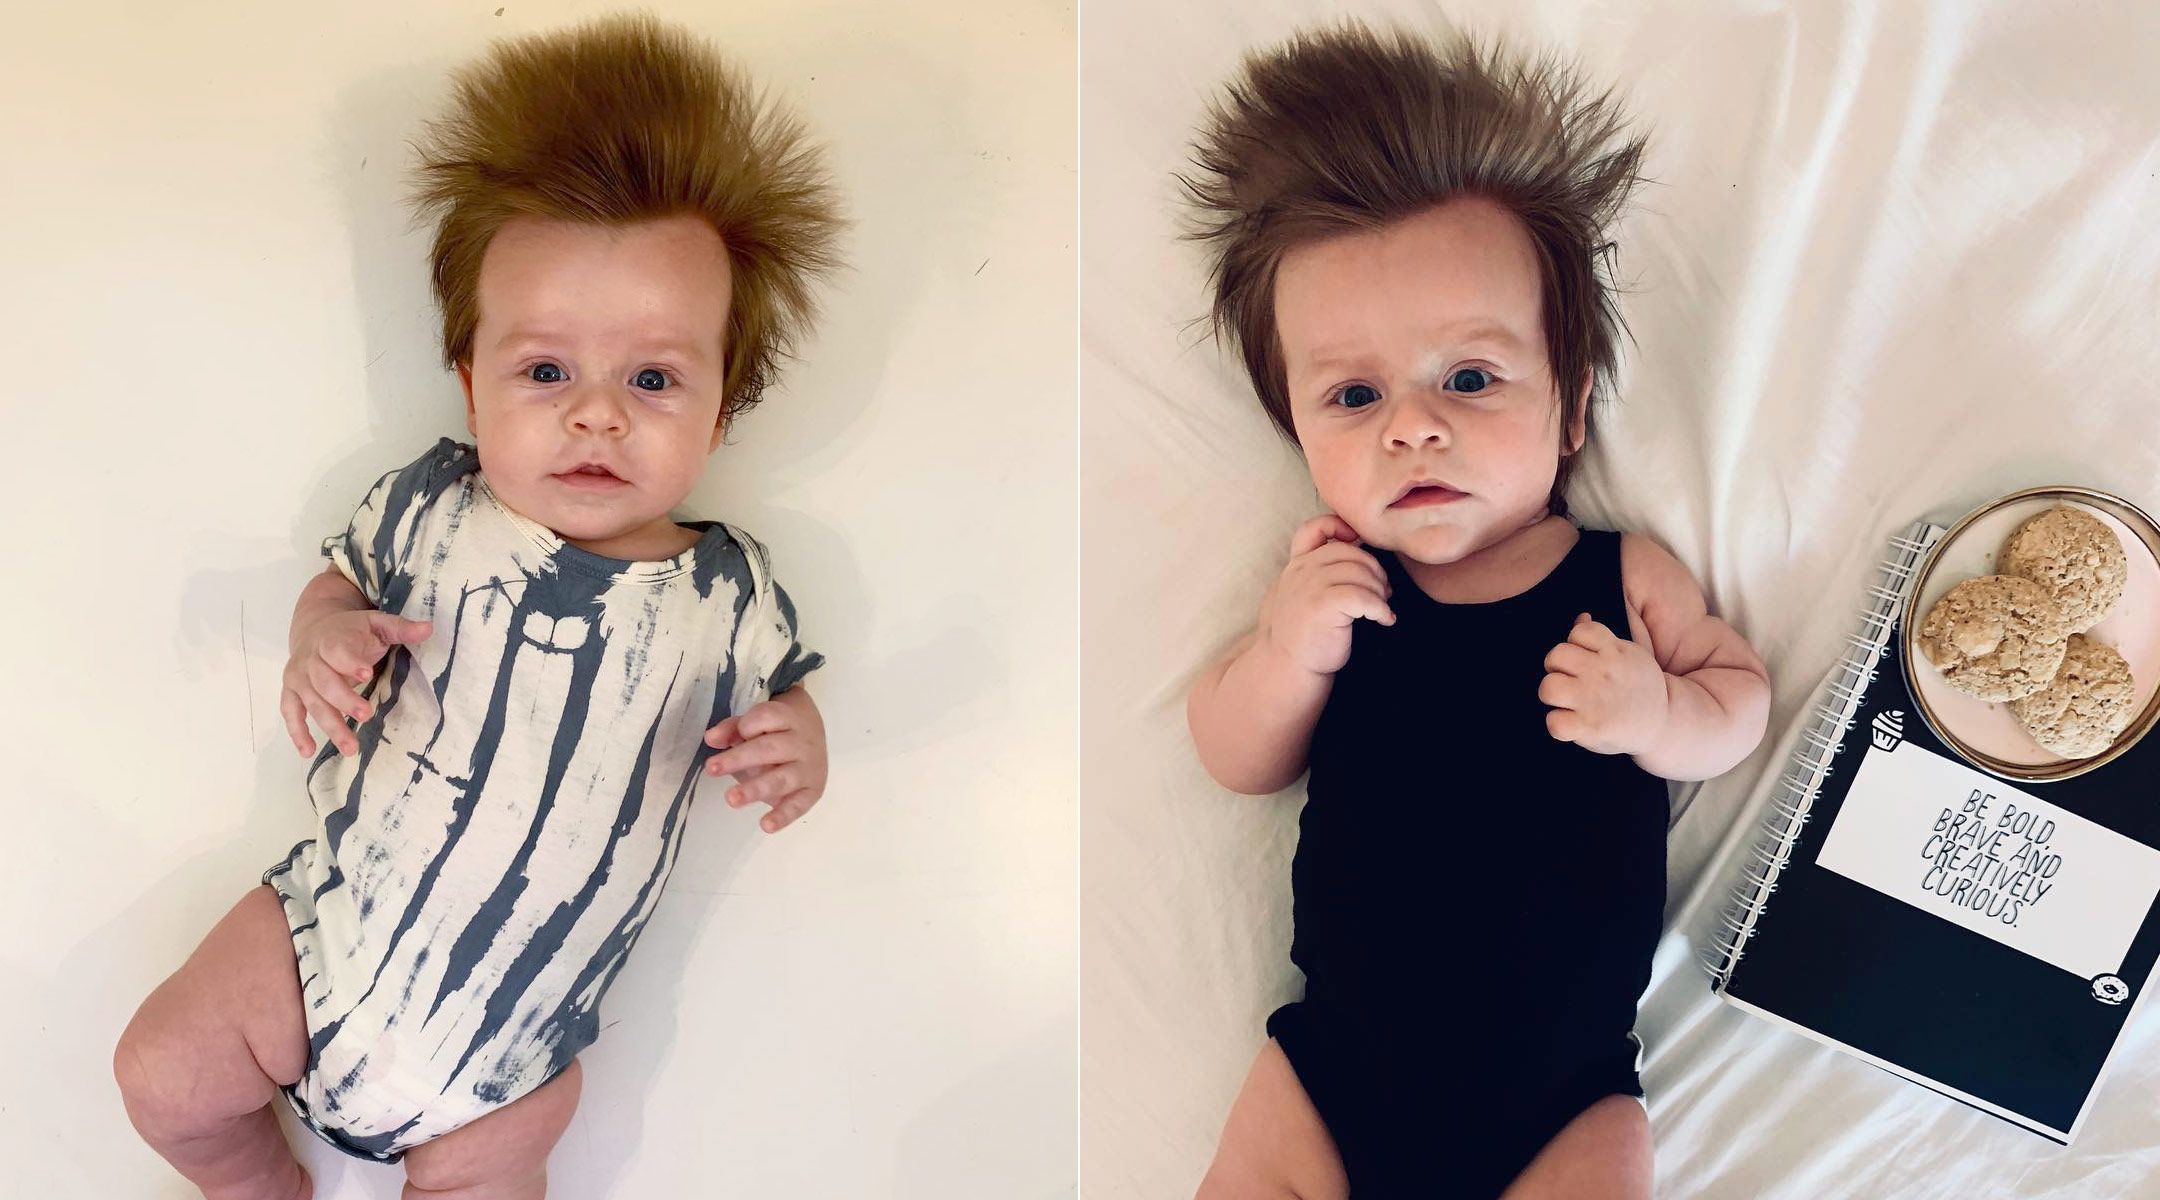 baby from australia becomes internet famous for his adorable hair